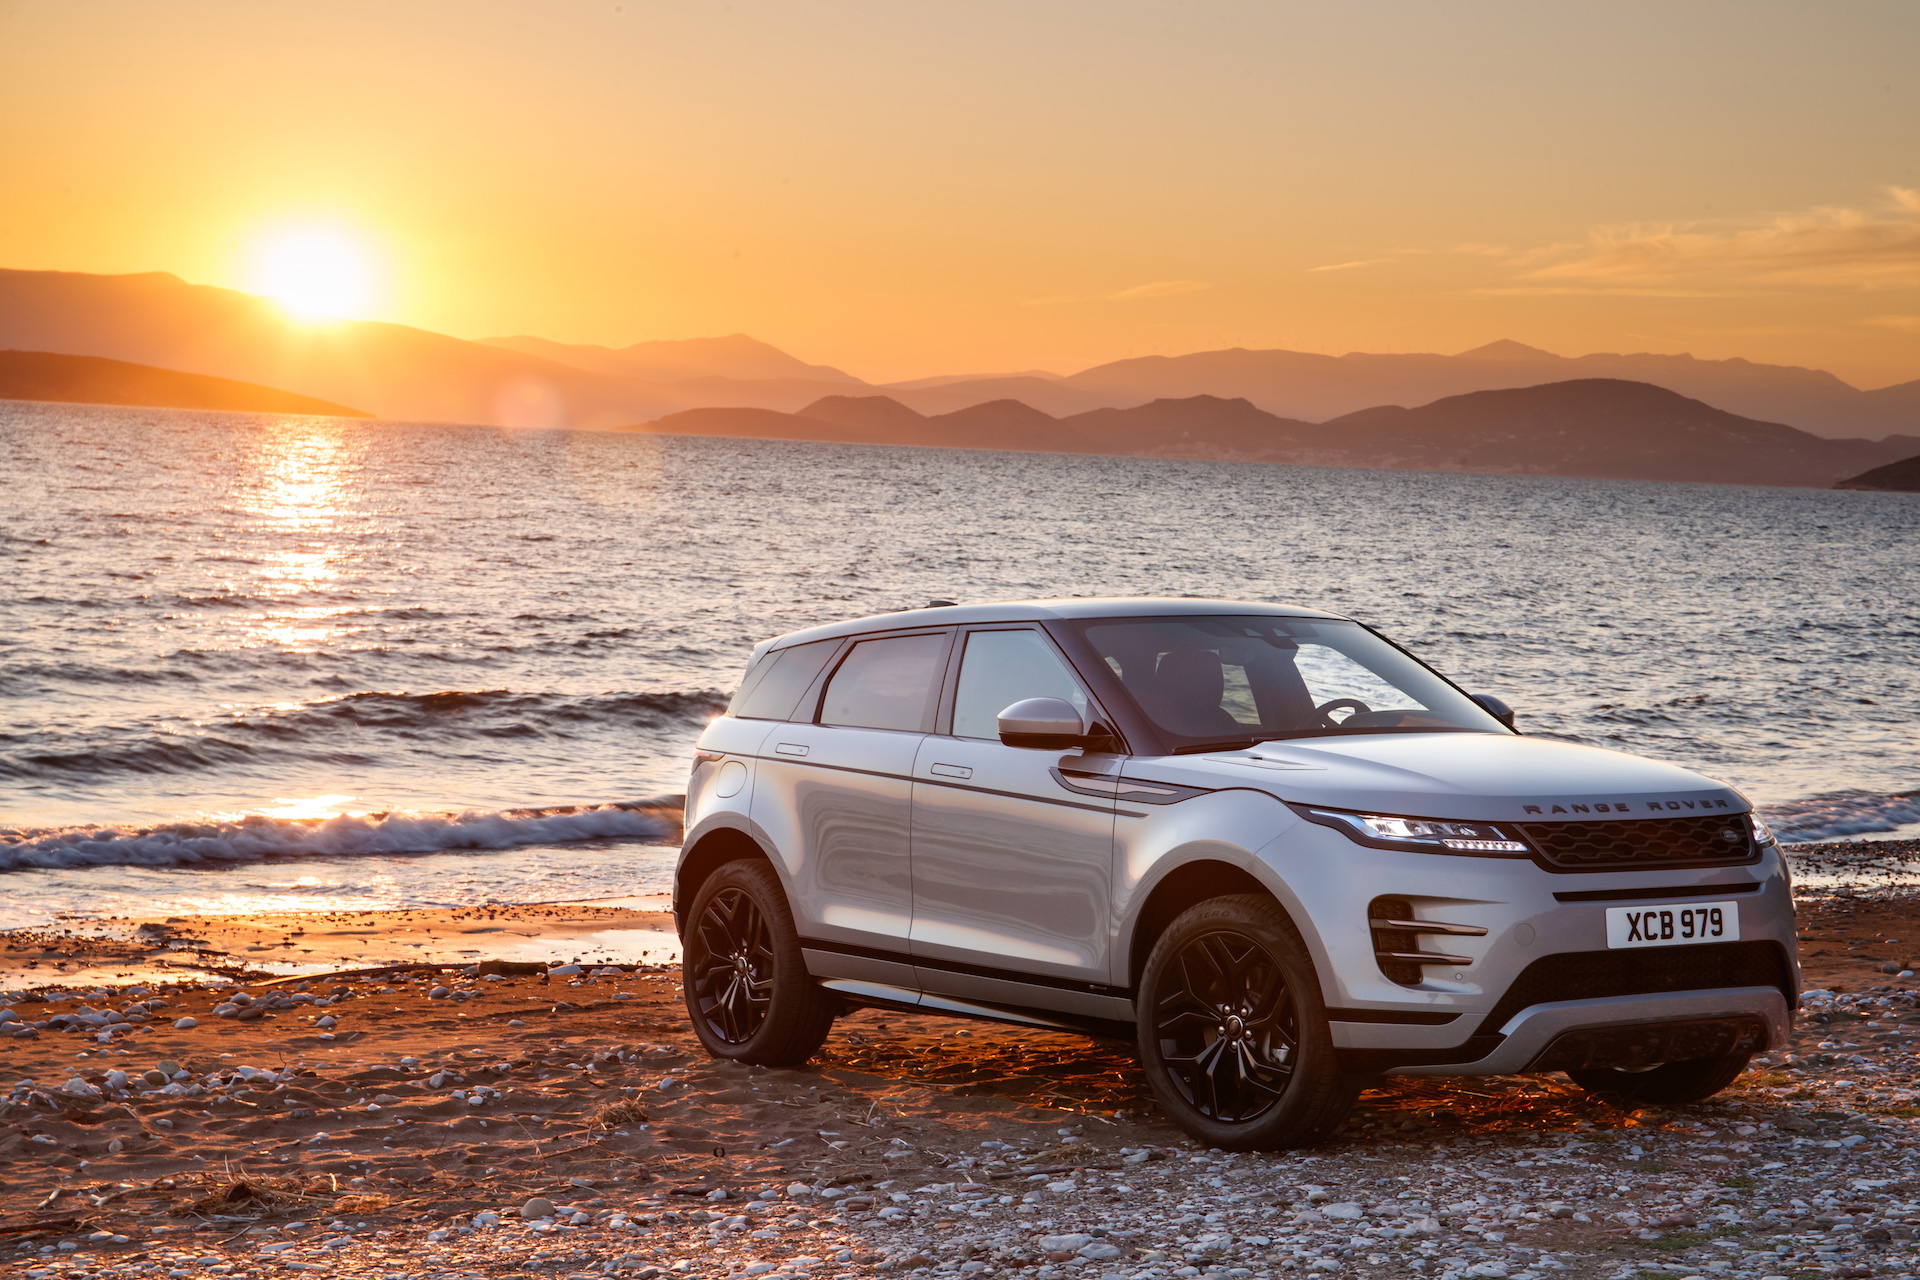 New And Used Land Rover Range Rover Evoque Prices Photos Reviews Specs The Car Connection